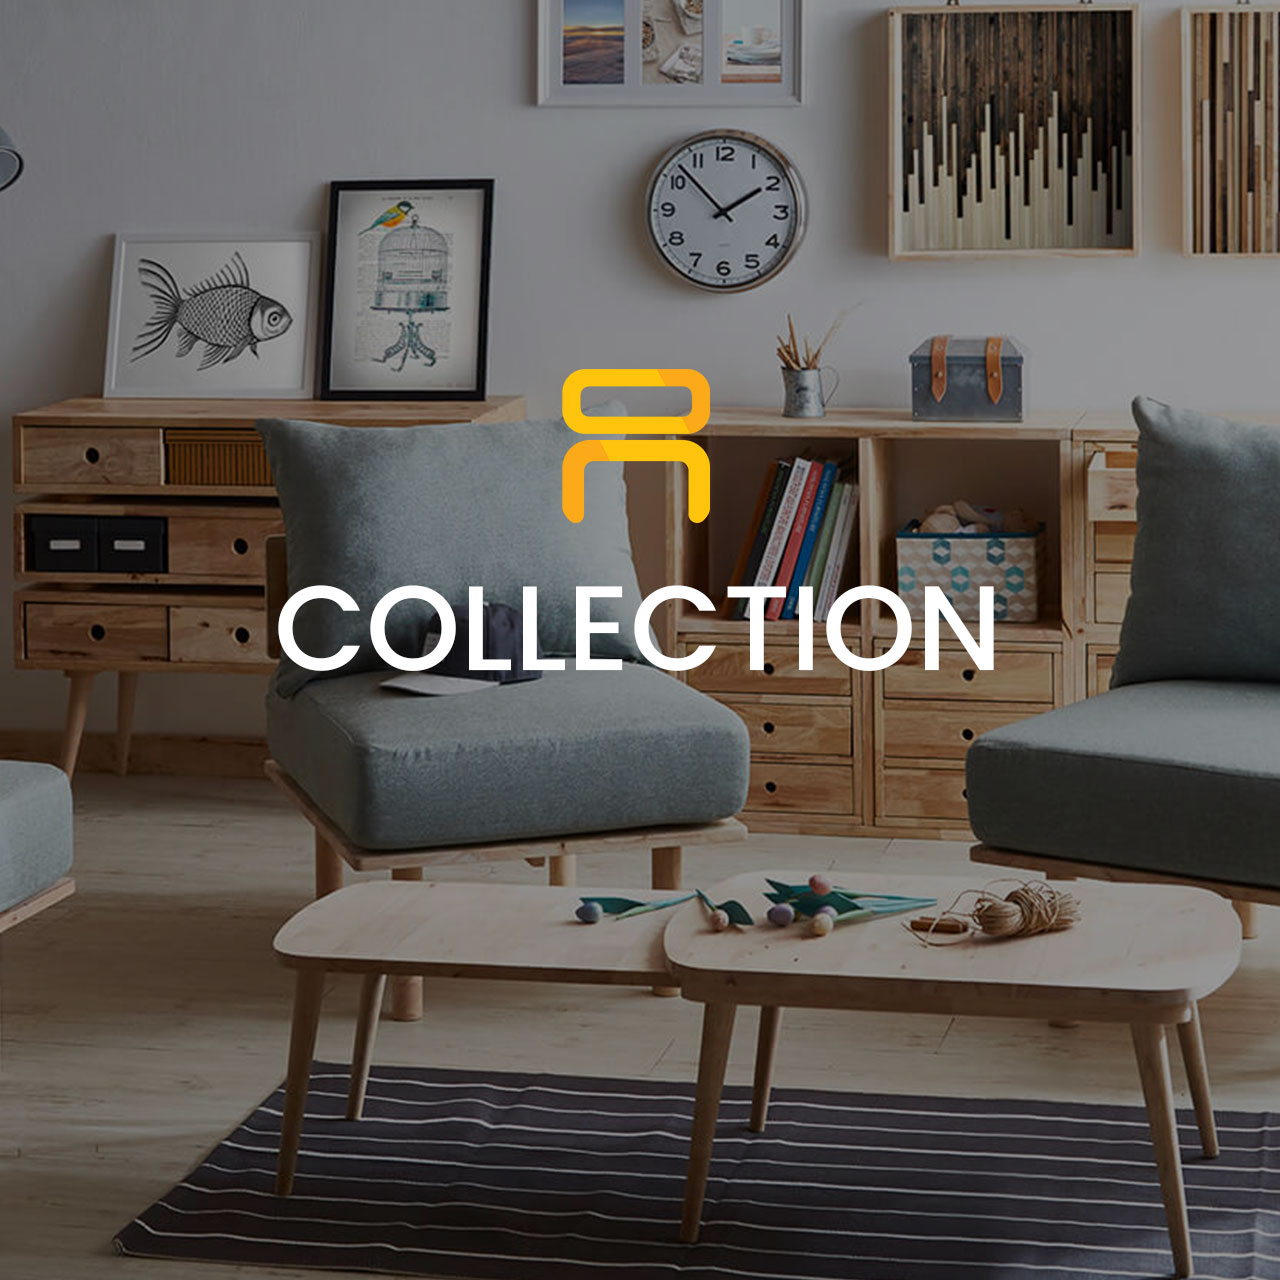 The Furniture Collection